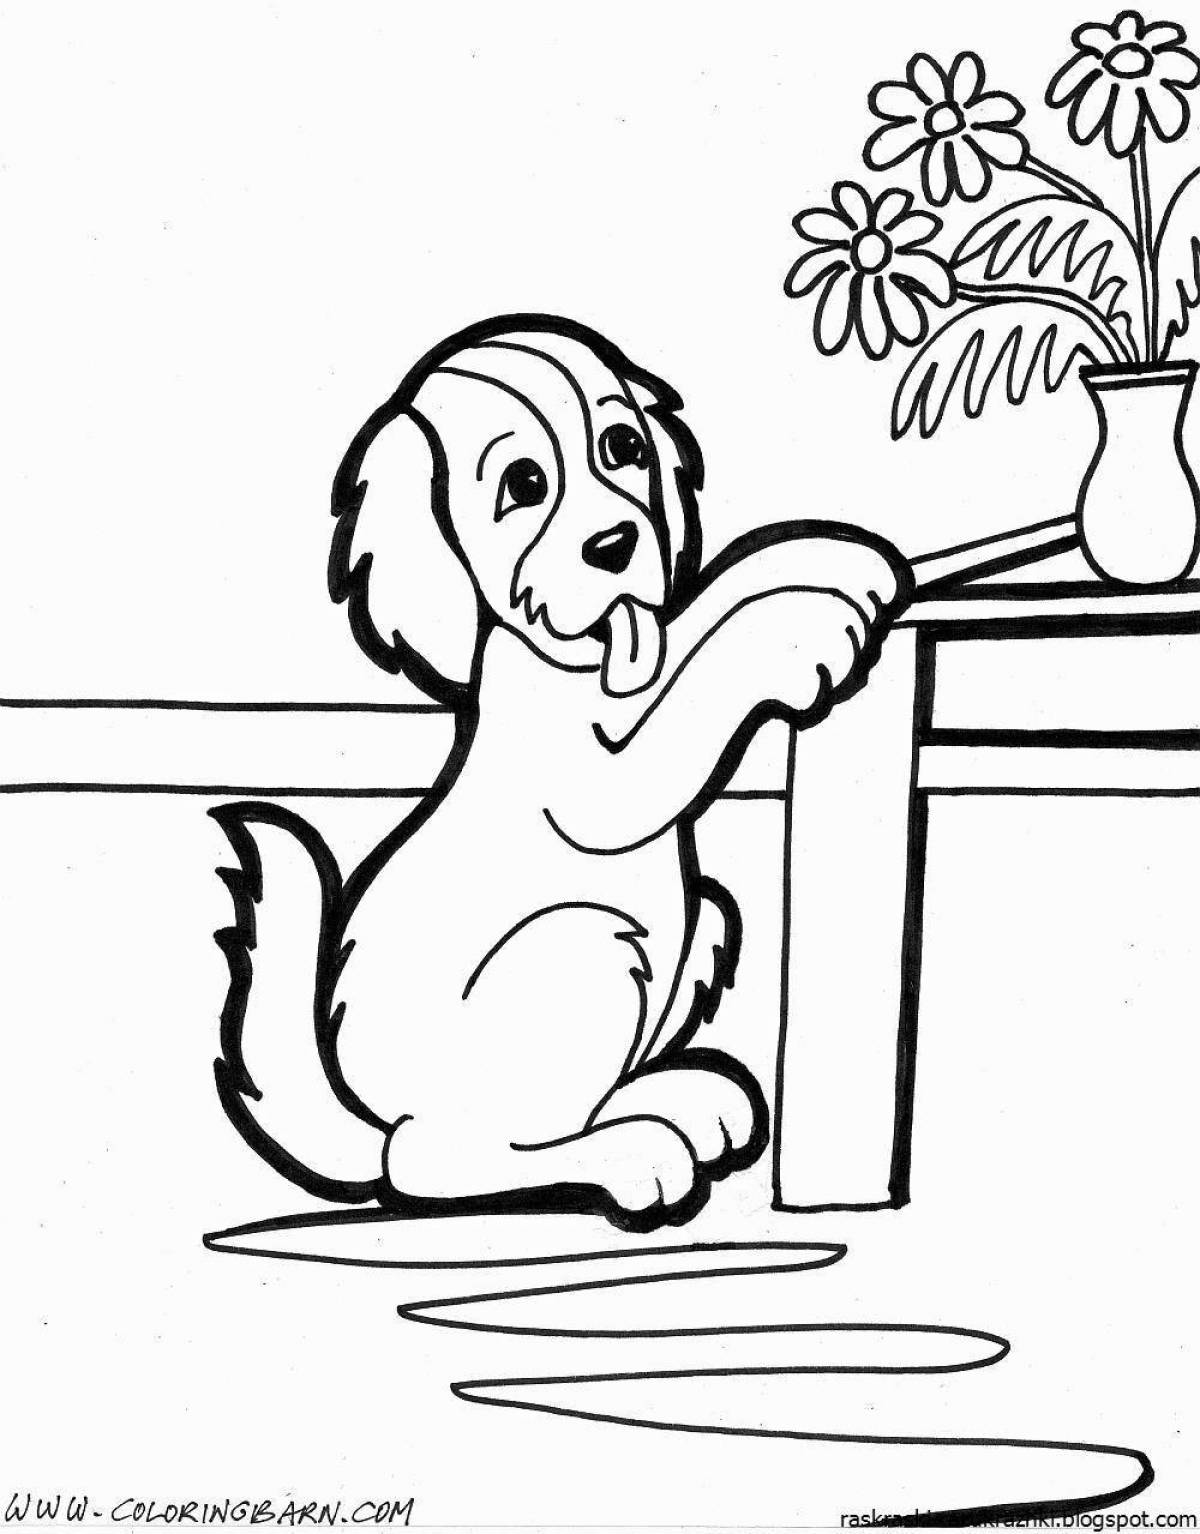 Joyful coloring pages of puppies